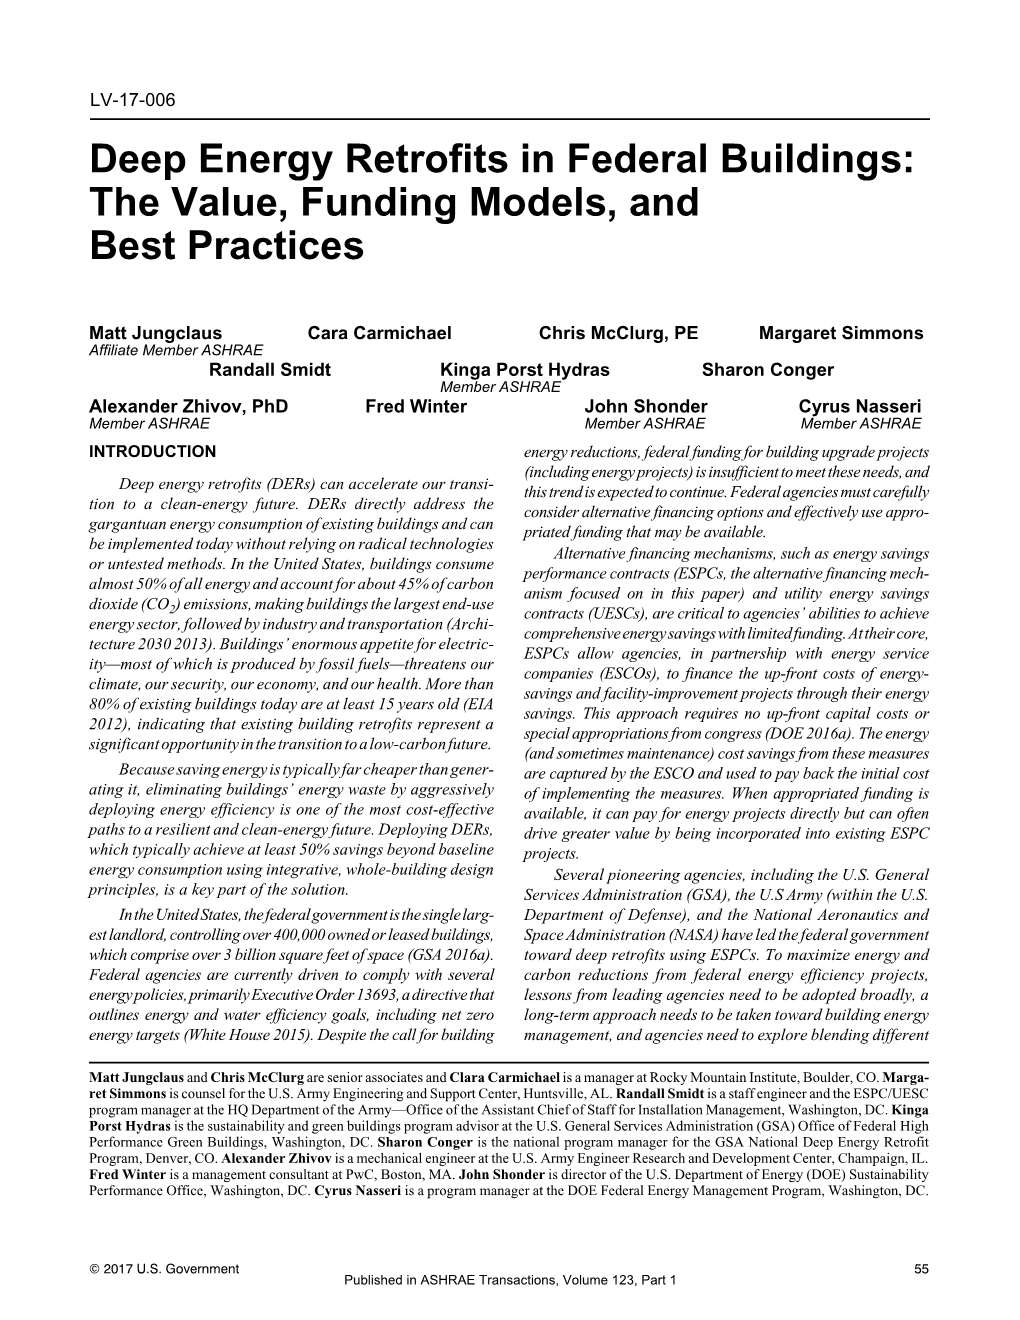 Deep Energy Retrofits in Federal Buildings: the Value, Funding Models, and Best Practices